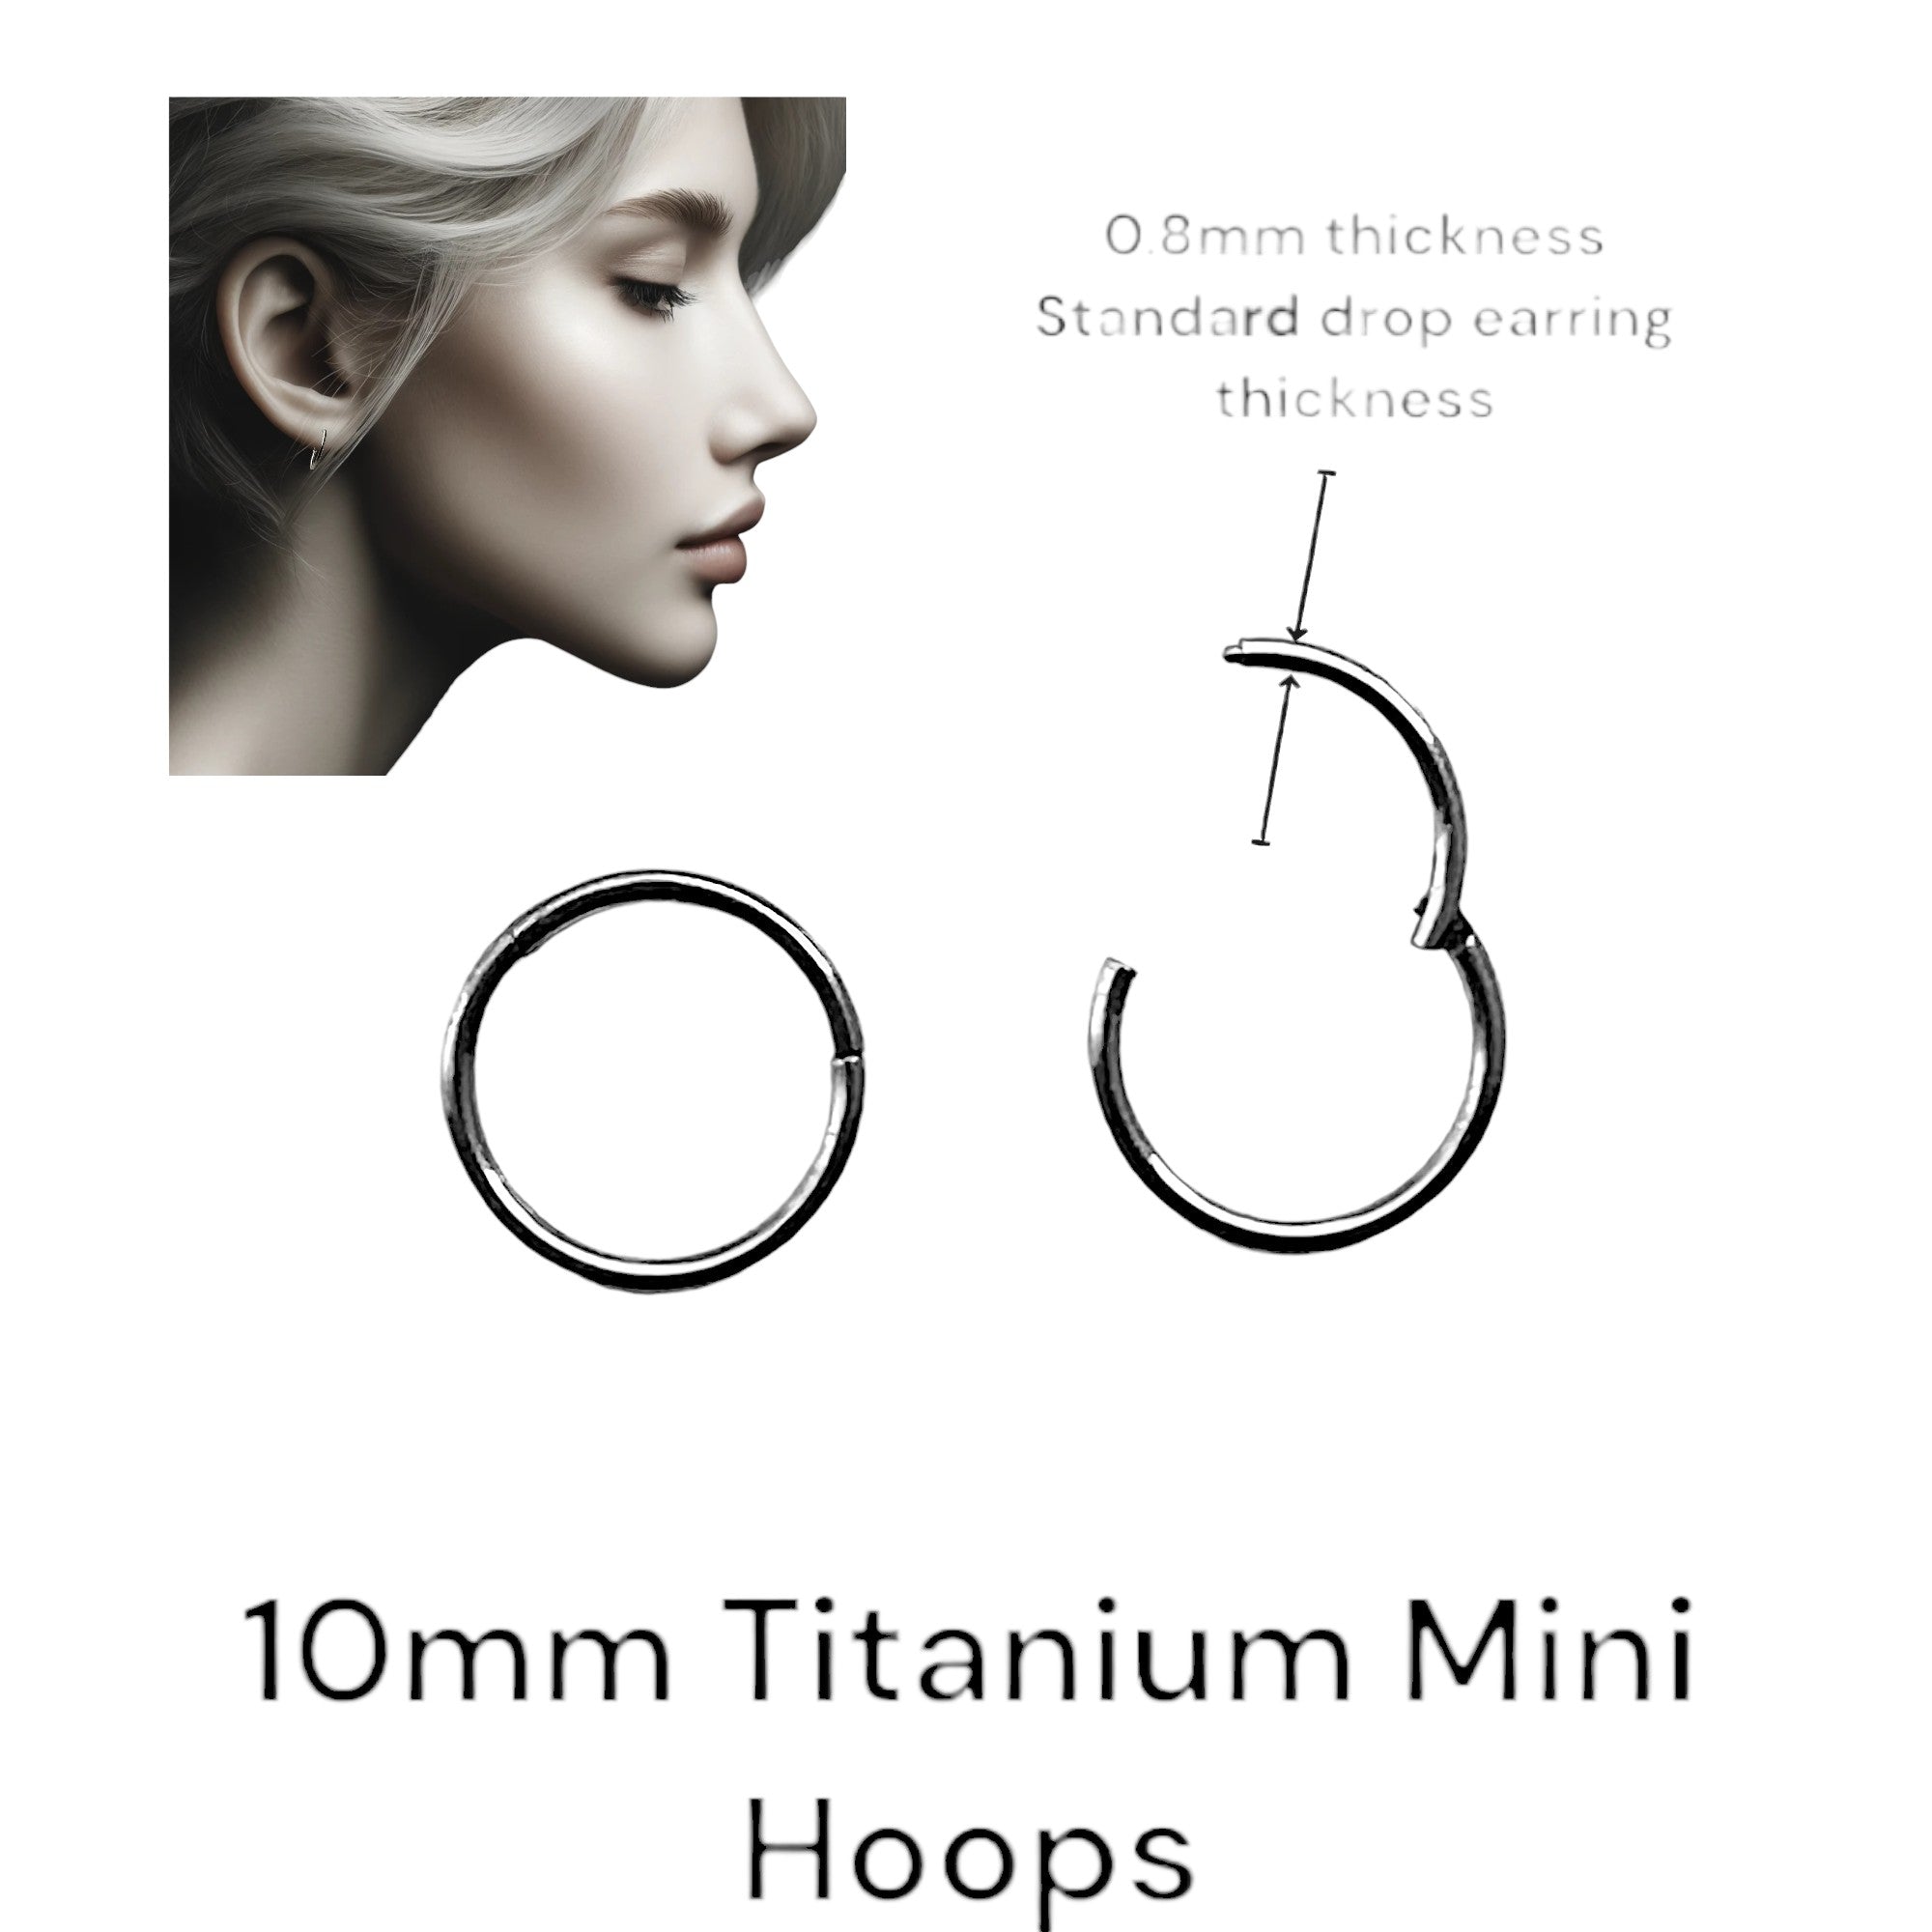 Hoops made from titanium. Mini 10mm titanium earring pair, lightweight and durable. Also a titanium on a white woman